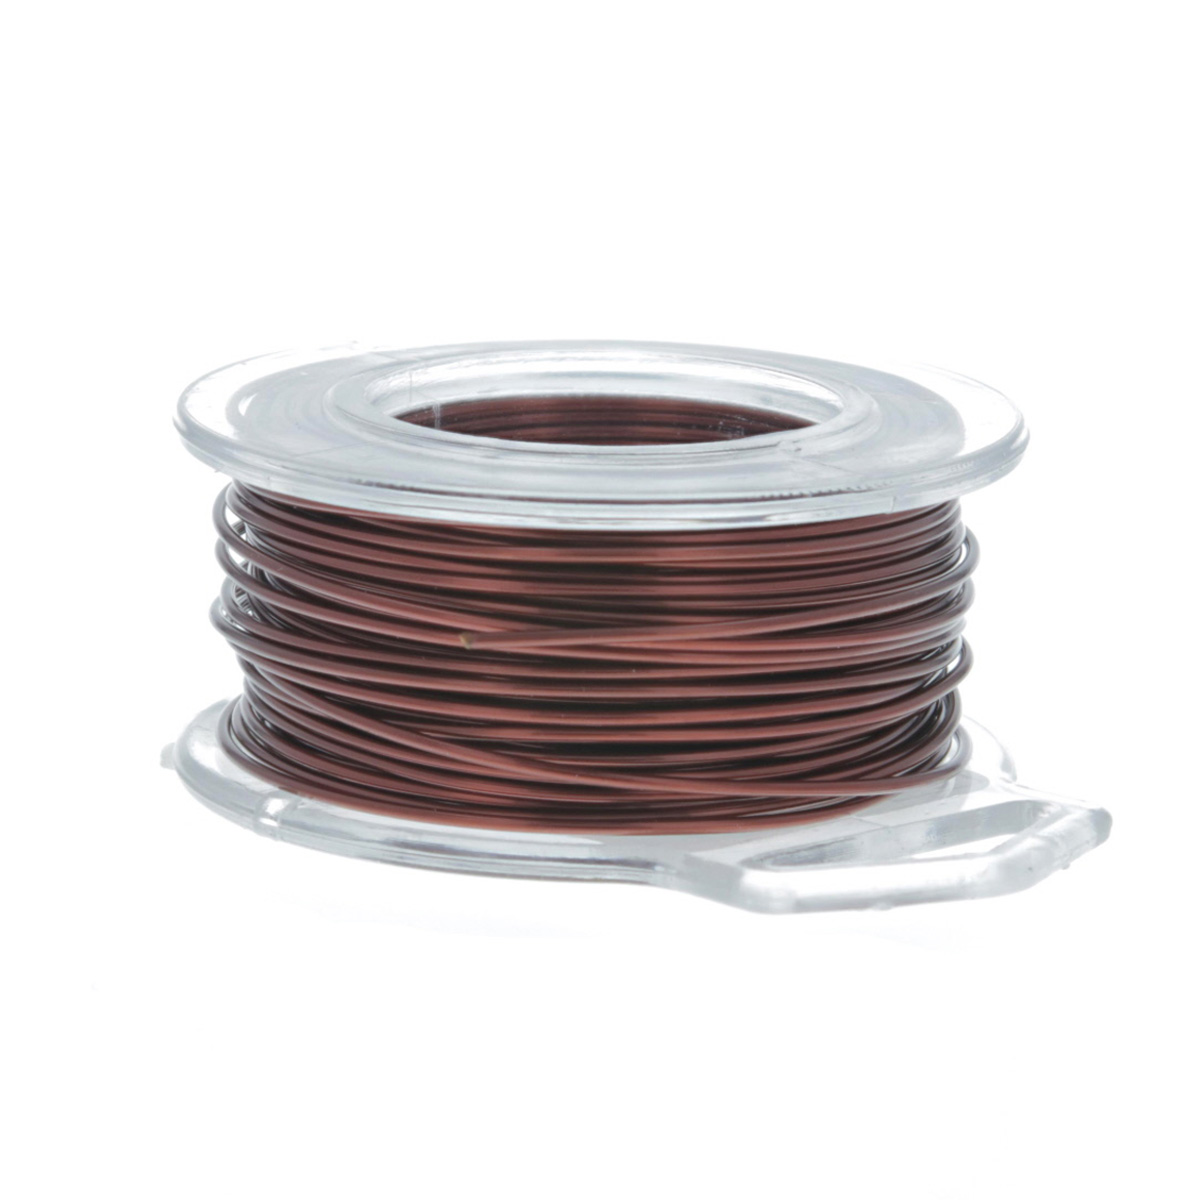 15 Amazing 26 Gauge Electrical Wire for 2023